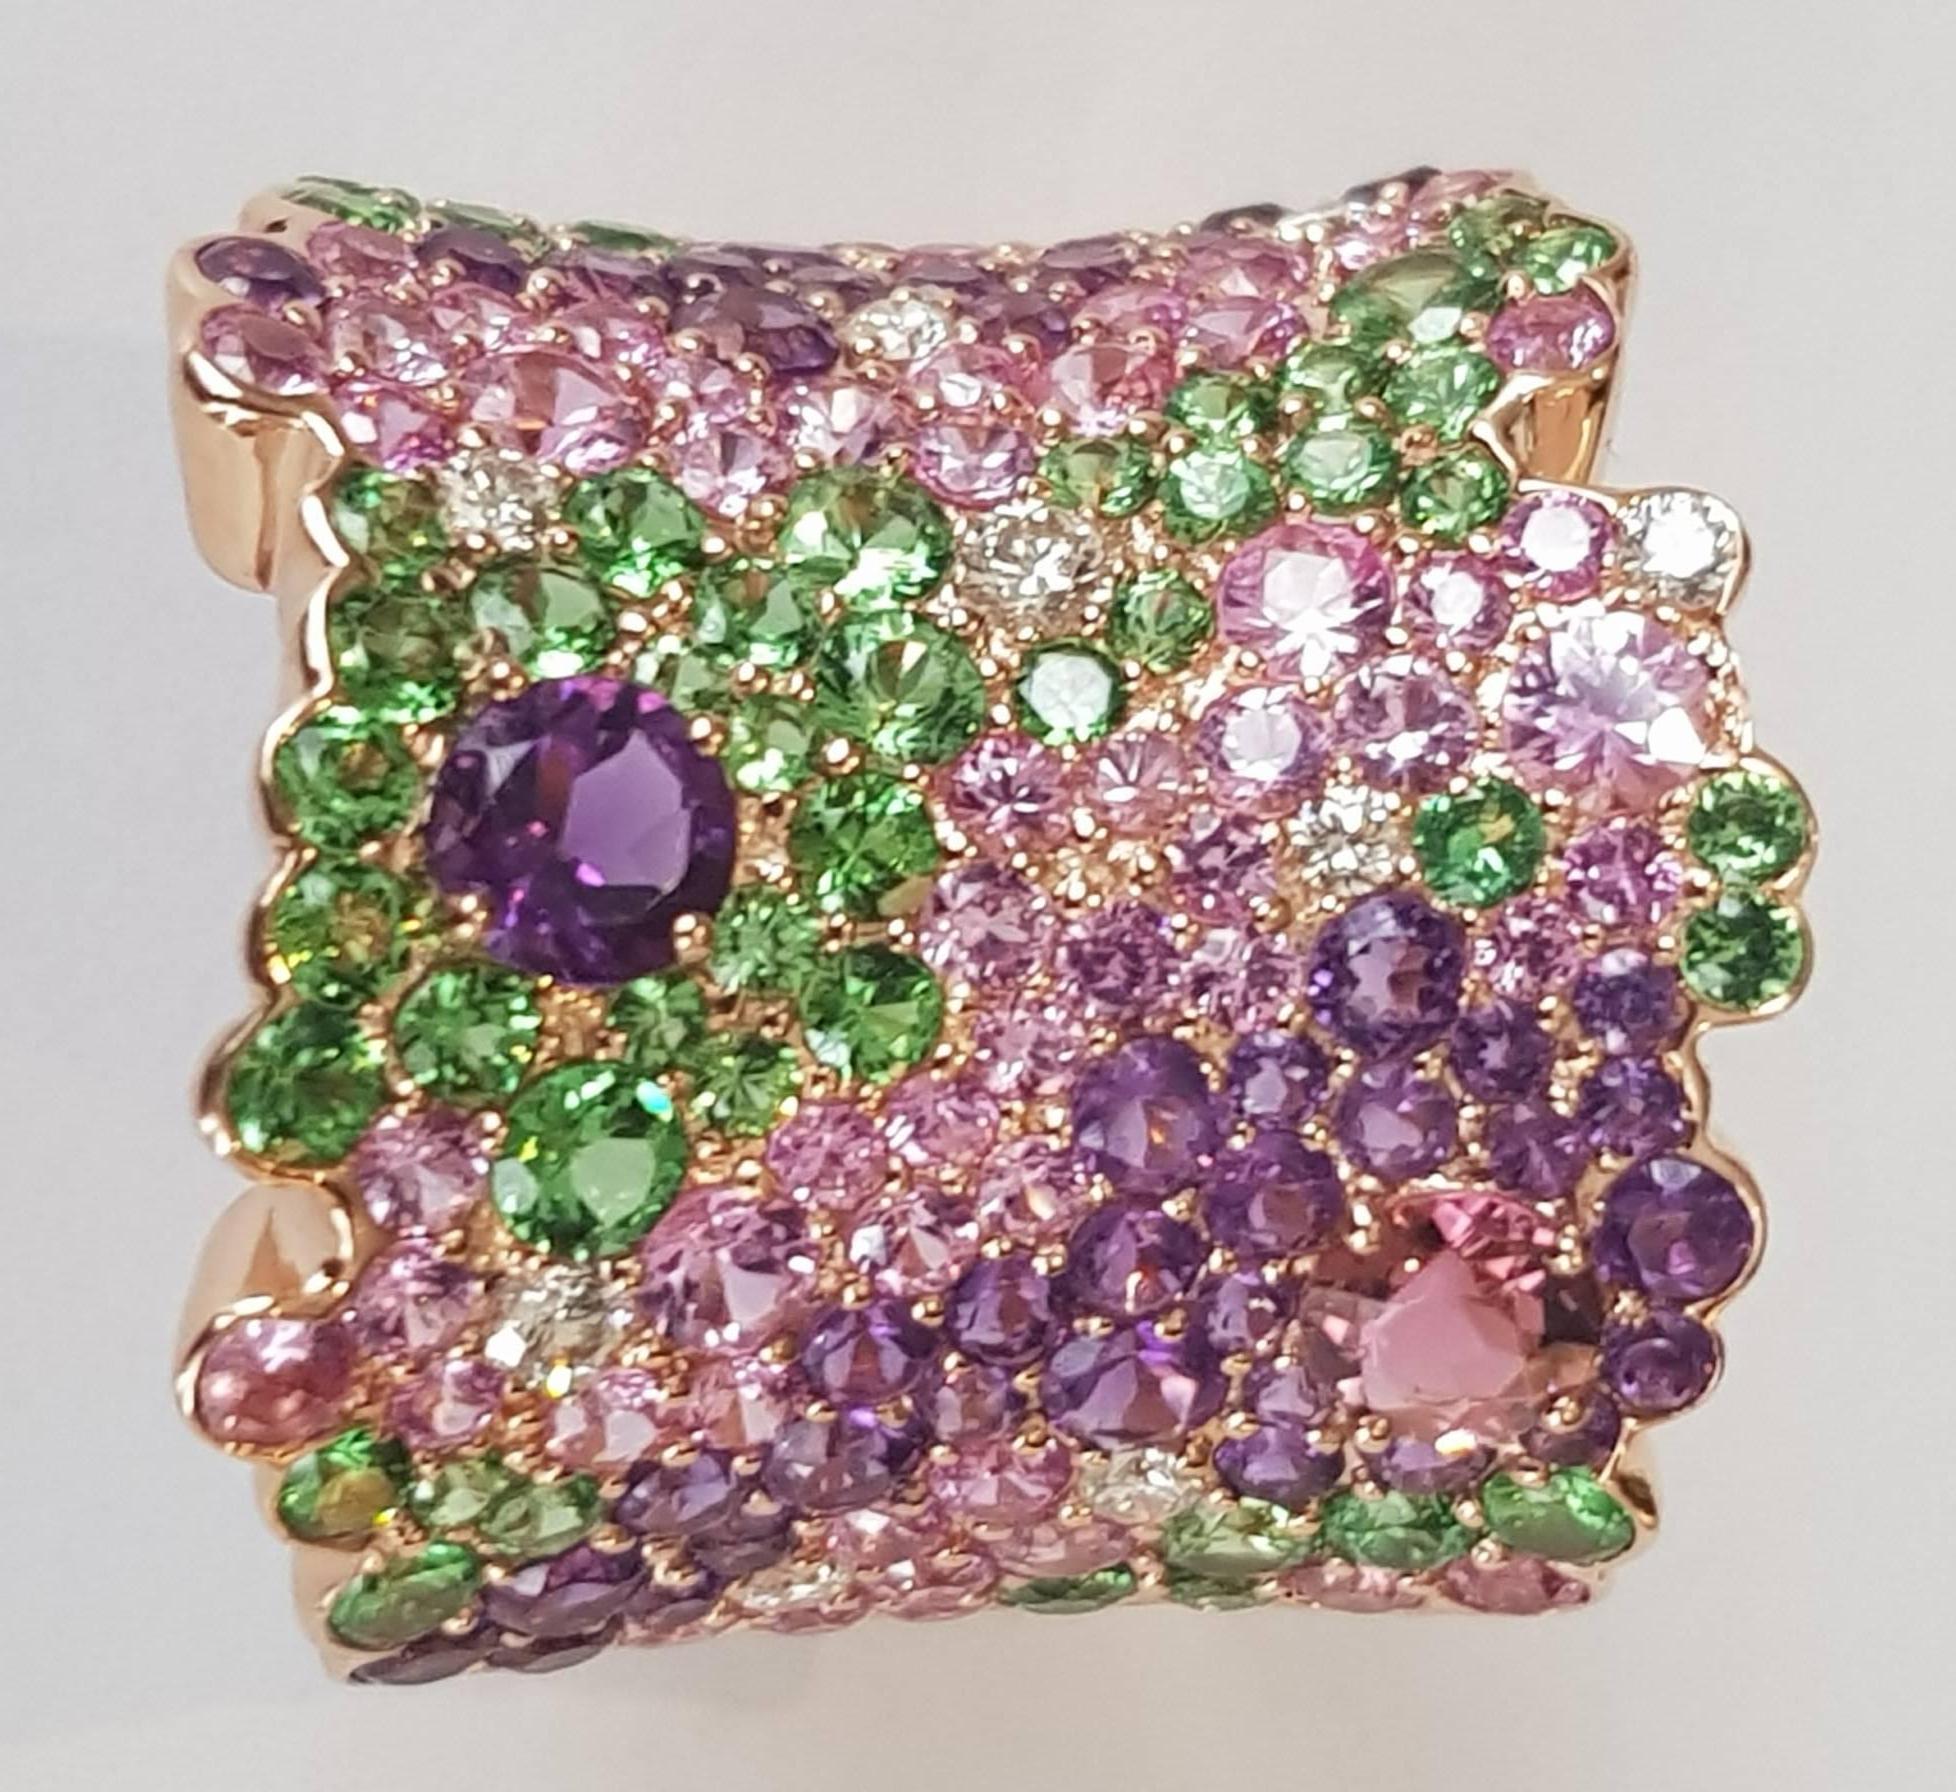 Sapphire, Tsavorite, Amethyst and Diamond Ring
9 diamonds 0.30 ct
61 pink sapphires 2.65 ct
44 amethyst 2.03 ct
46 tsavorites 2.09 ct
1 pink tourmaline 0.30 ct
18 karat rose gold
size 53.5 (can be adjusted one size up or down)